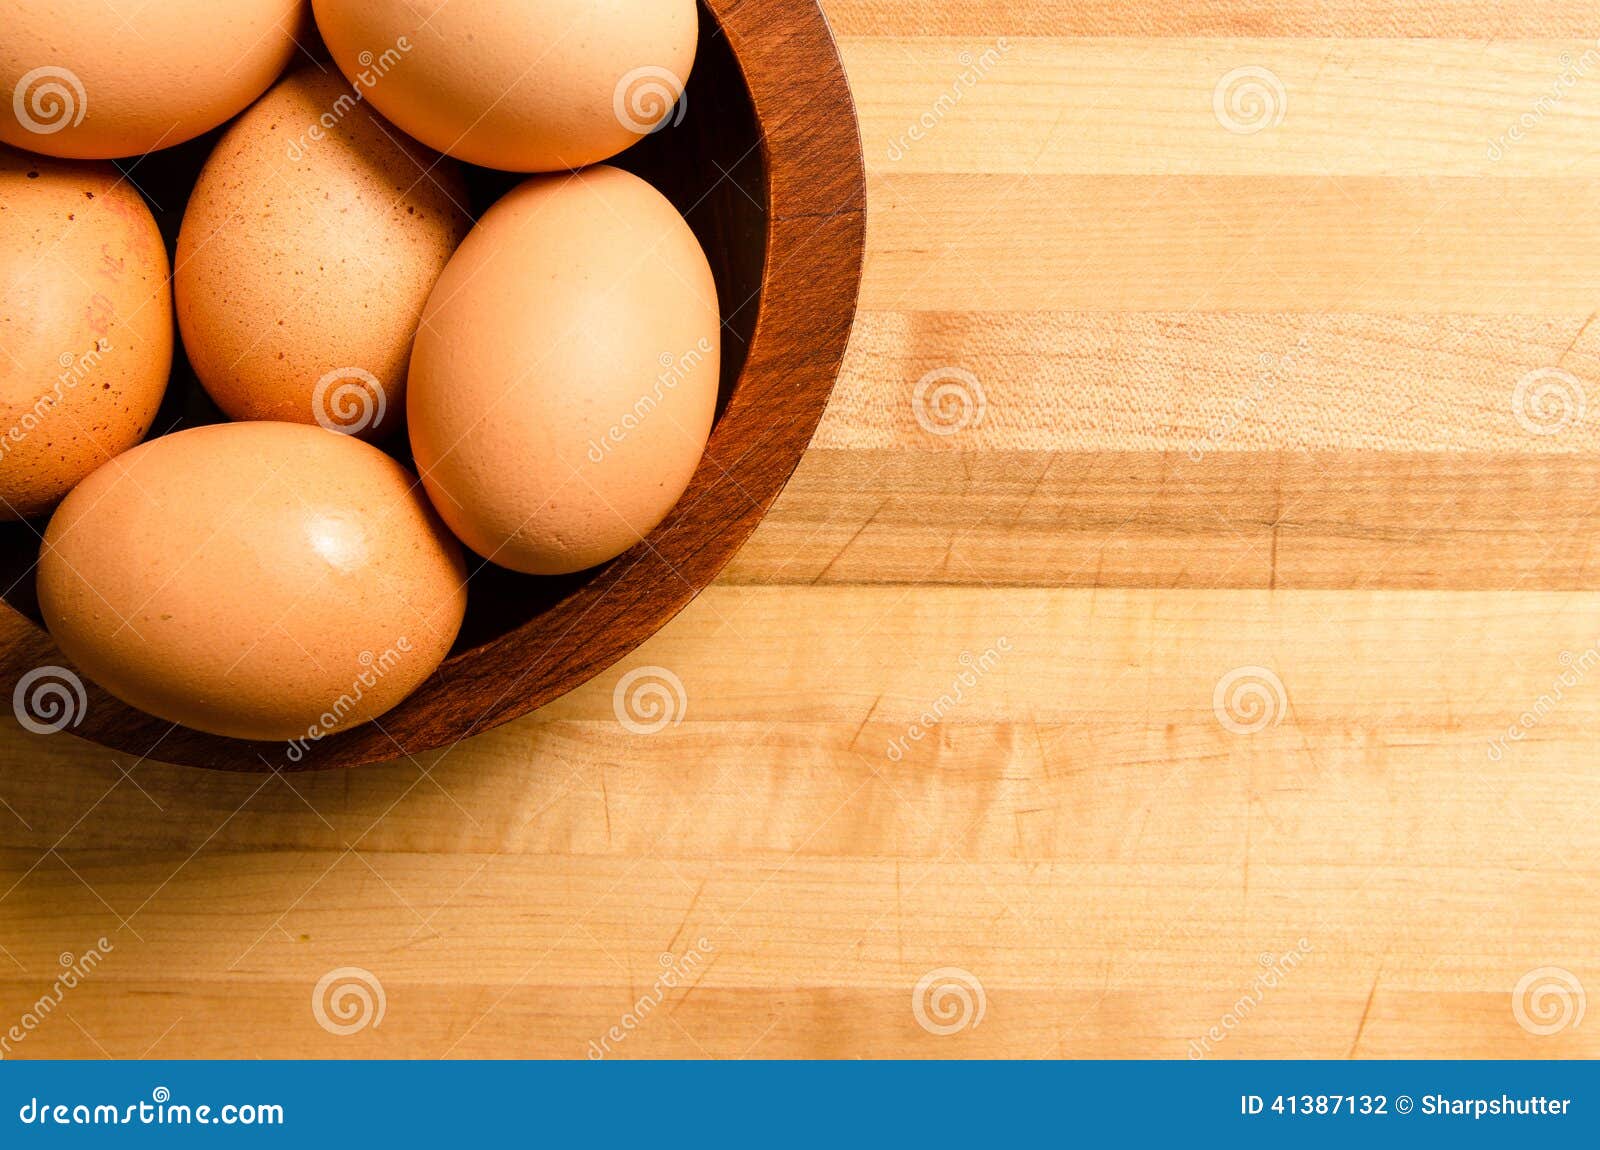 eggs-in-a-bowl-stock-photo-image-of-cooking-mixing-41387132